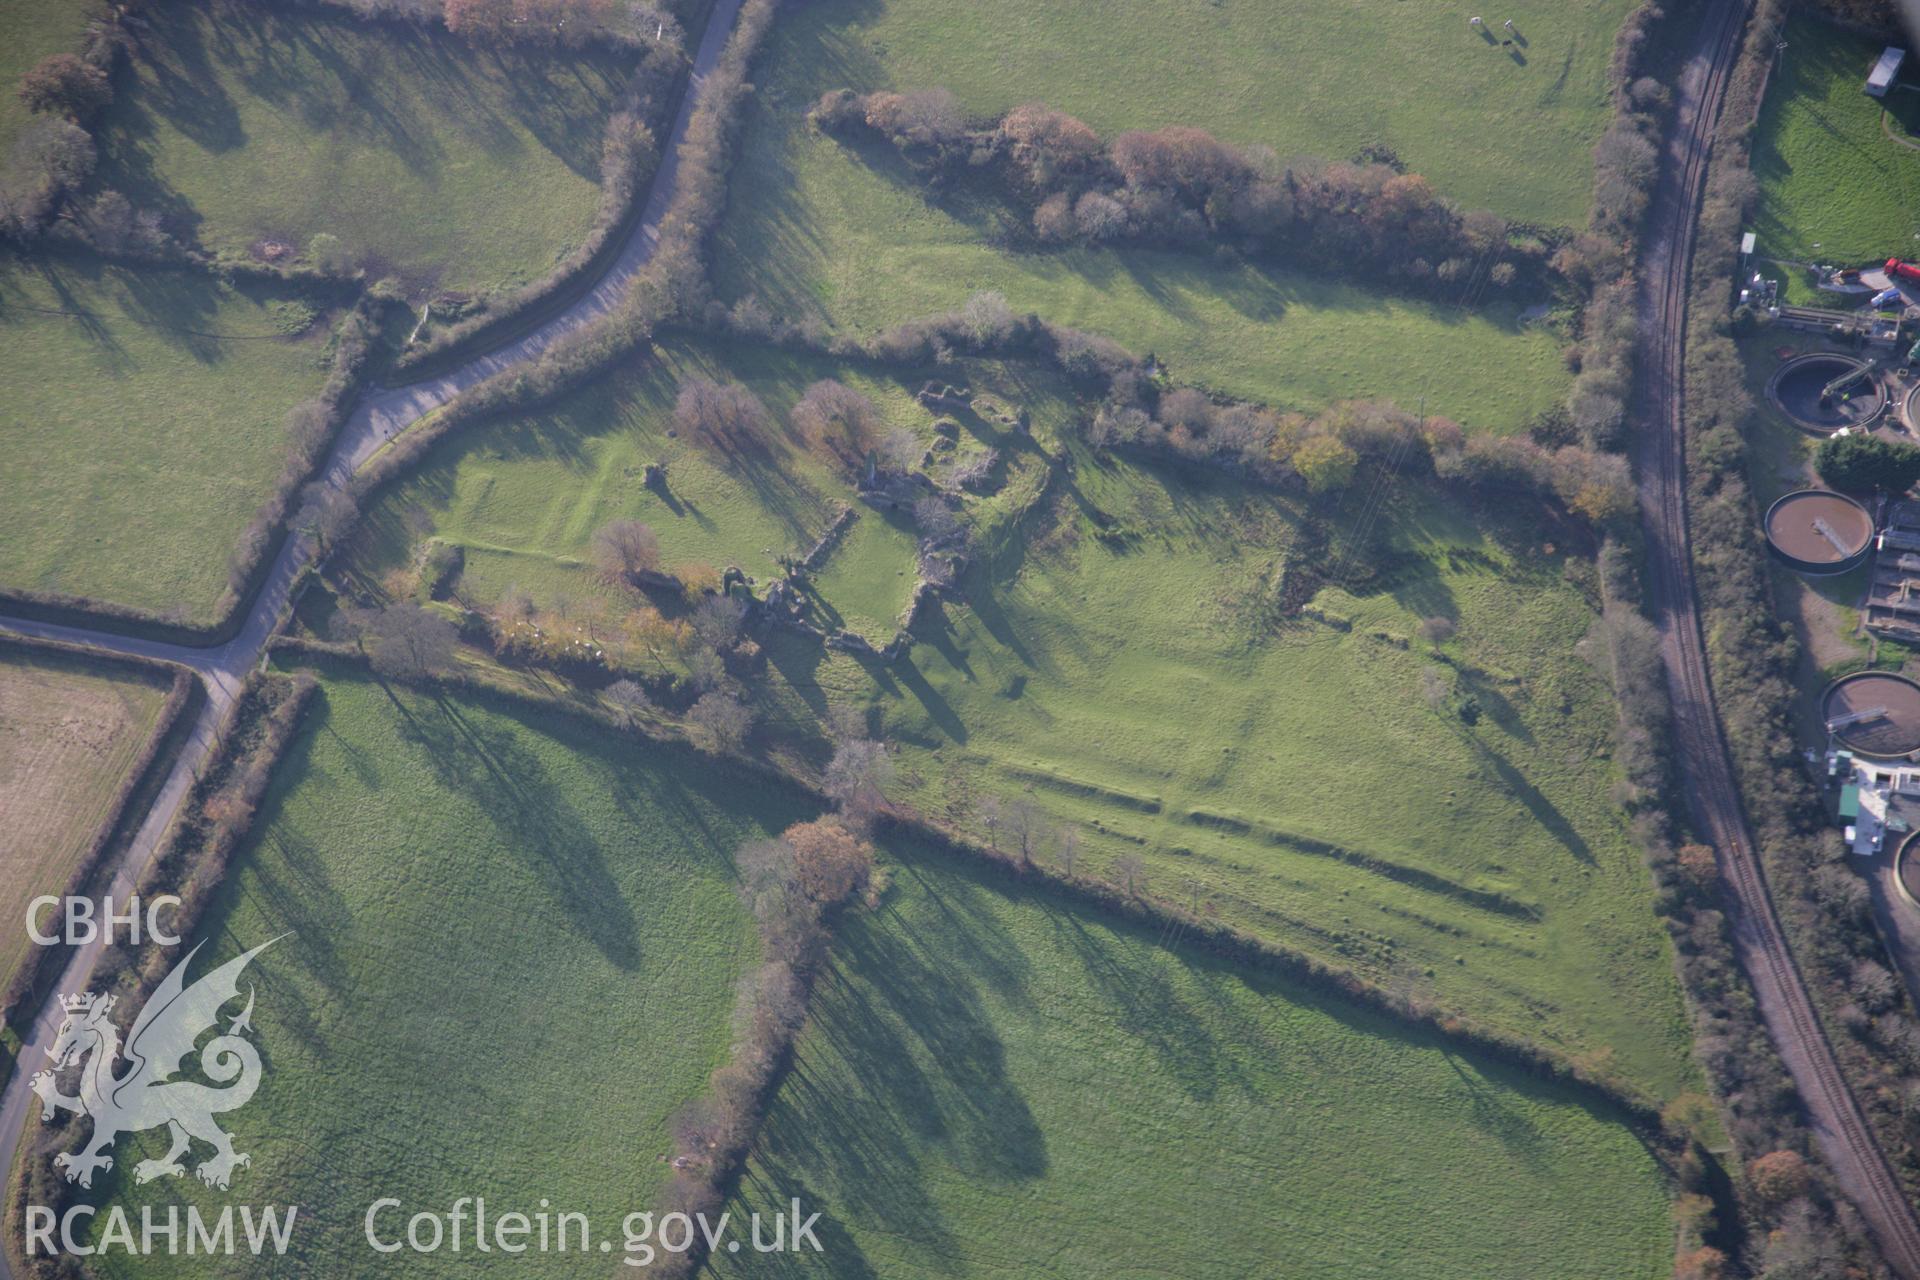 RCAHMW colour oblique aerial photograph of Haroldston House Garden Earthworks, Haverfordwest, in winter with low light looking south-west.. Taken on 19 November 2005 by Toby Driver